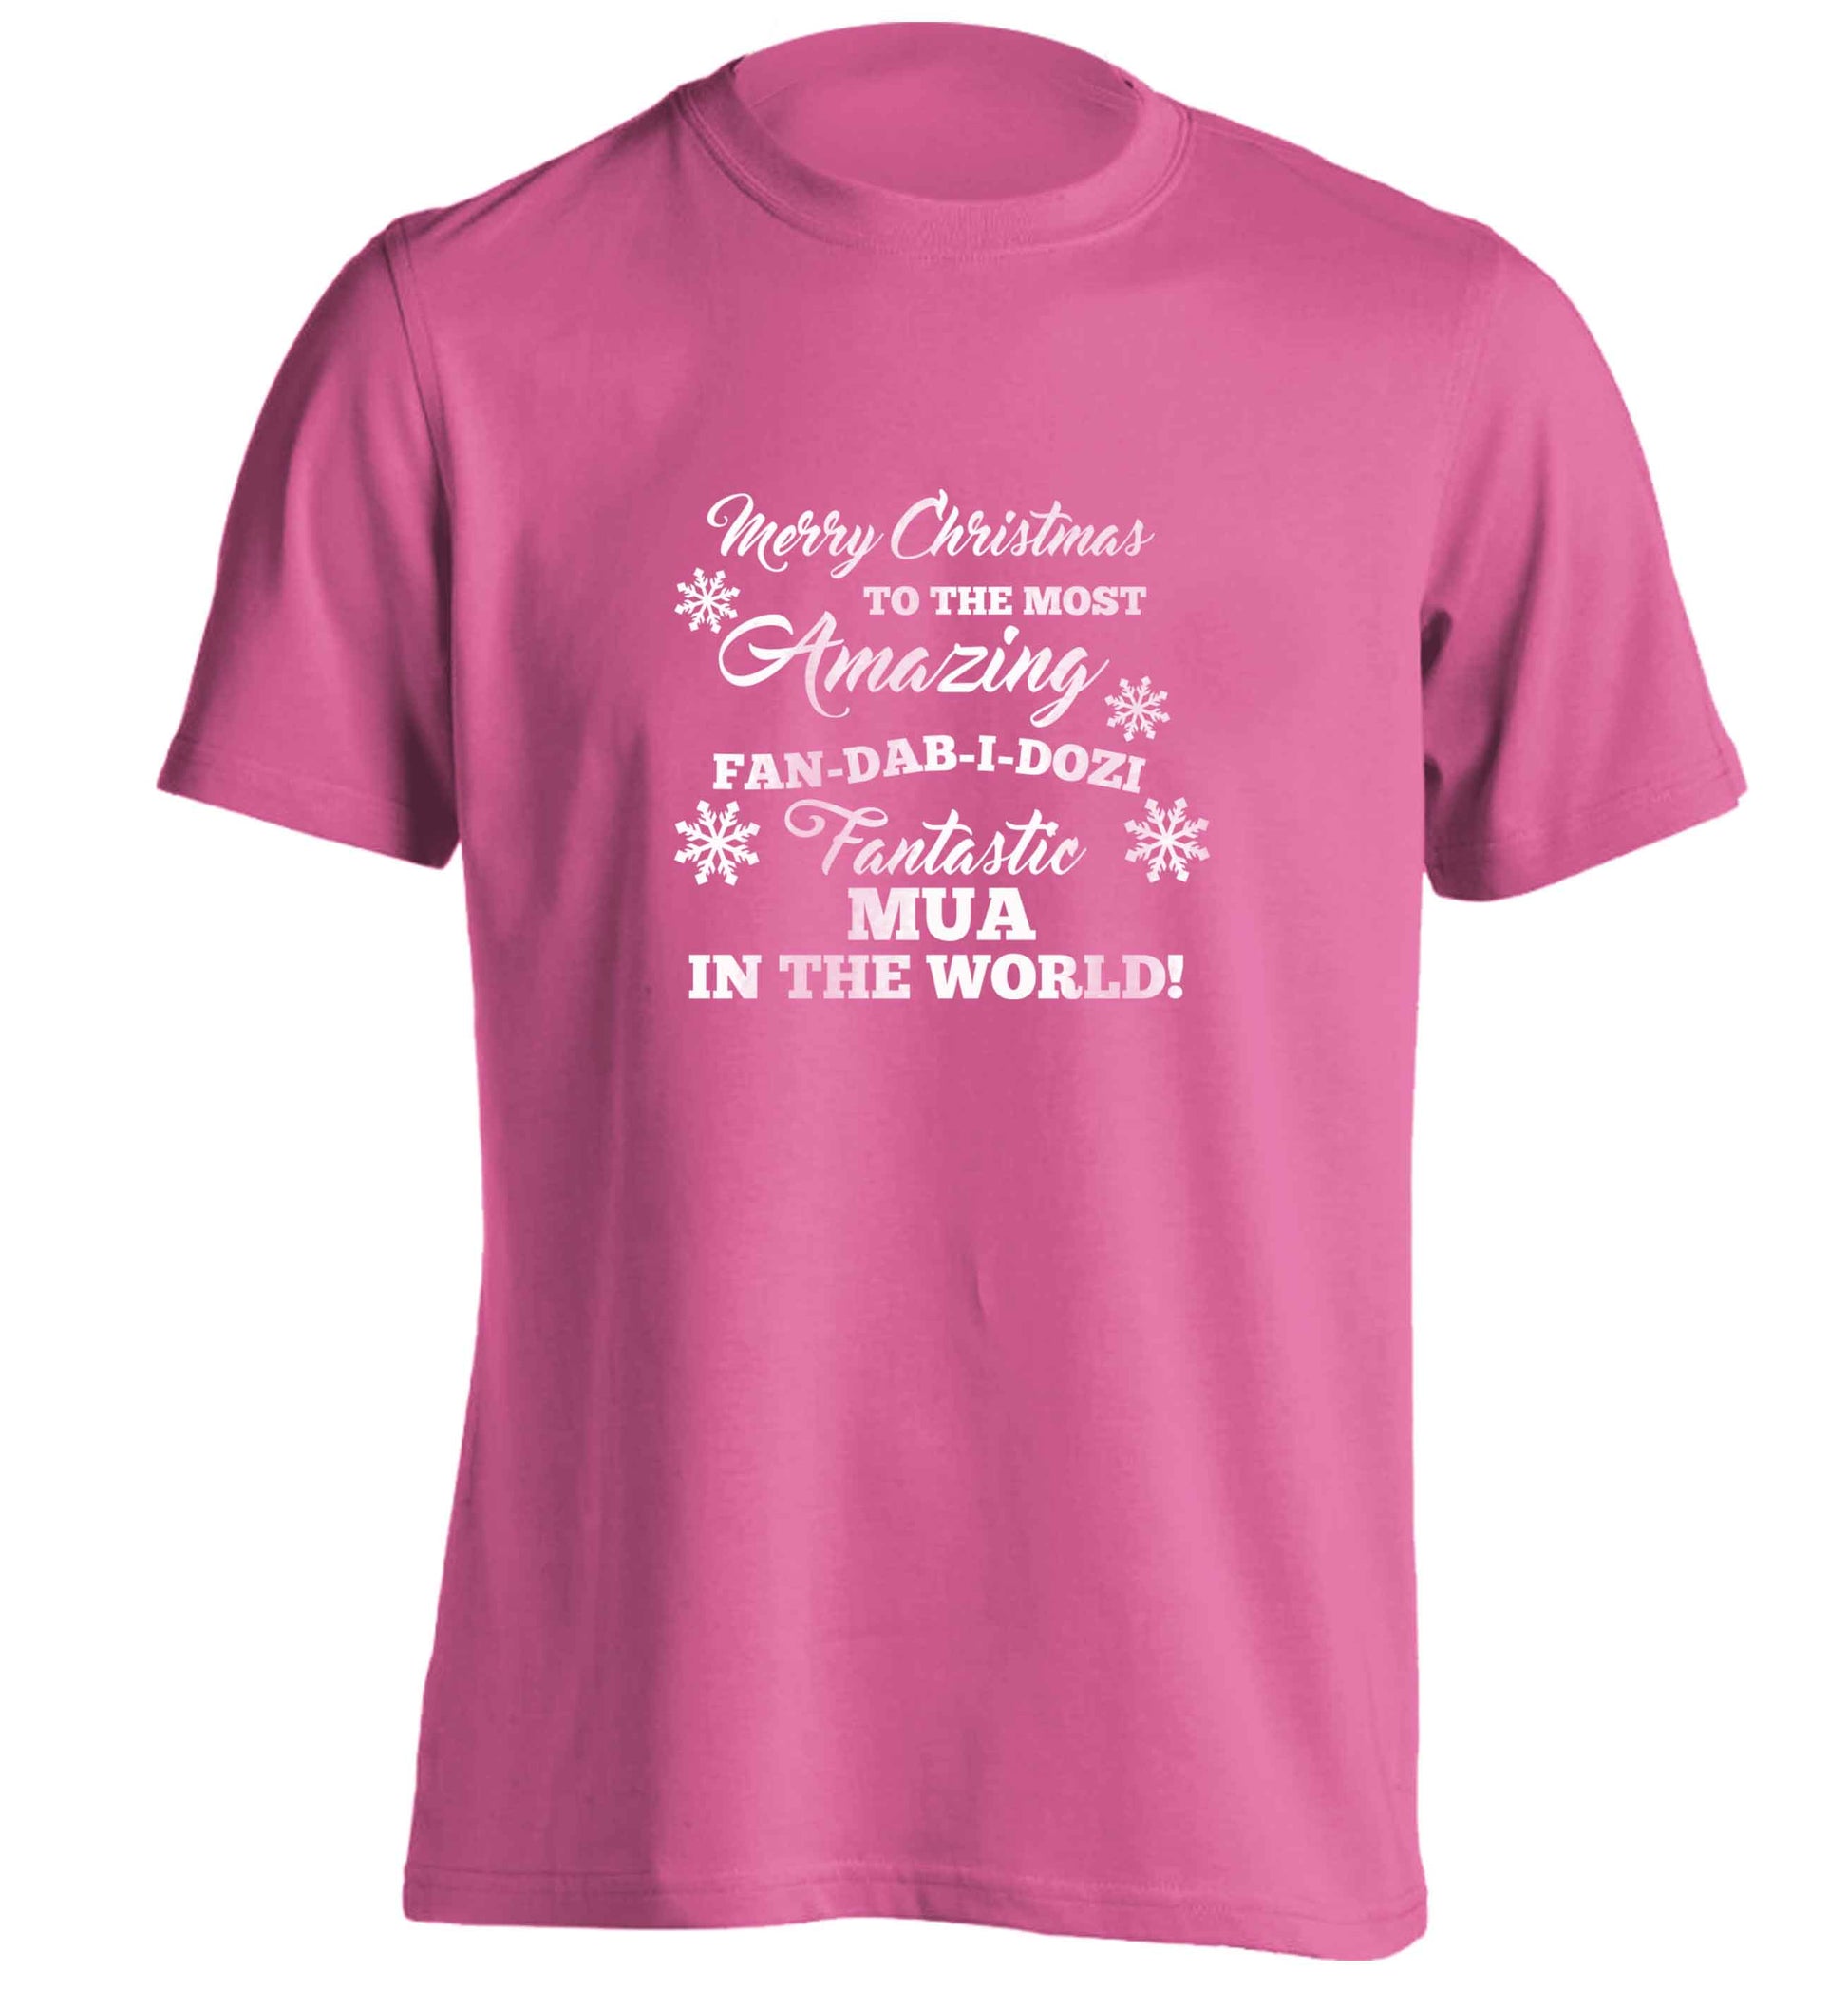 Merry Christmas to the most amazing fan-dab-i-dozi fantasic MUA in the world adults unisex pink Tshirt 2XL